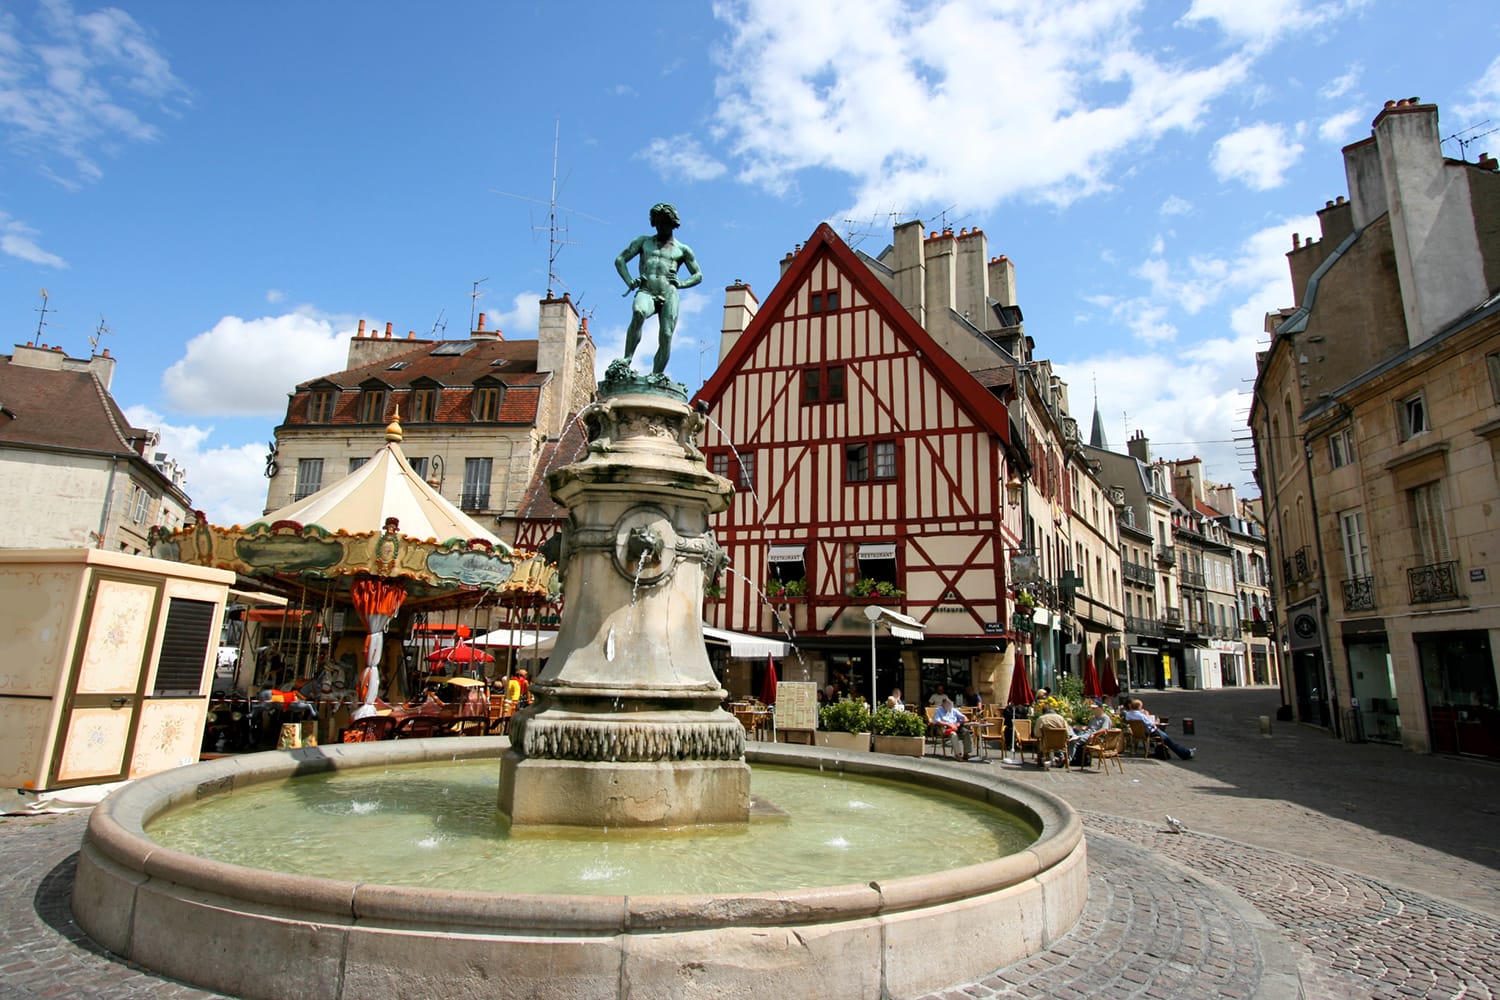 Famous fountain, characteristic houses and colorful carousel in Dijon, Burgundy, France. Place Francois Rude.